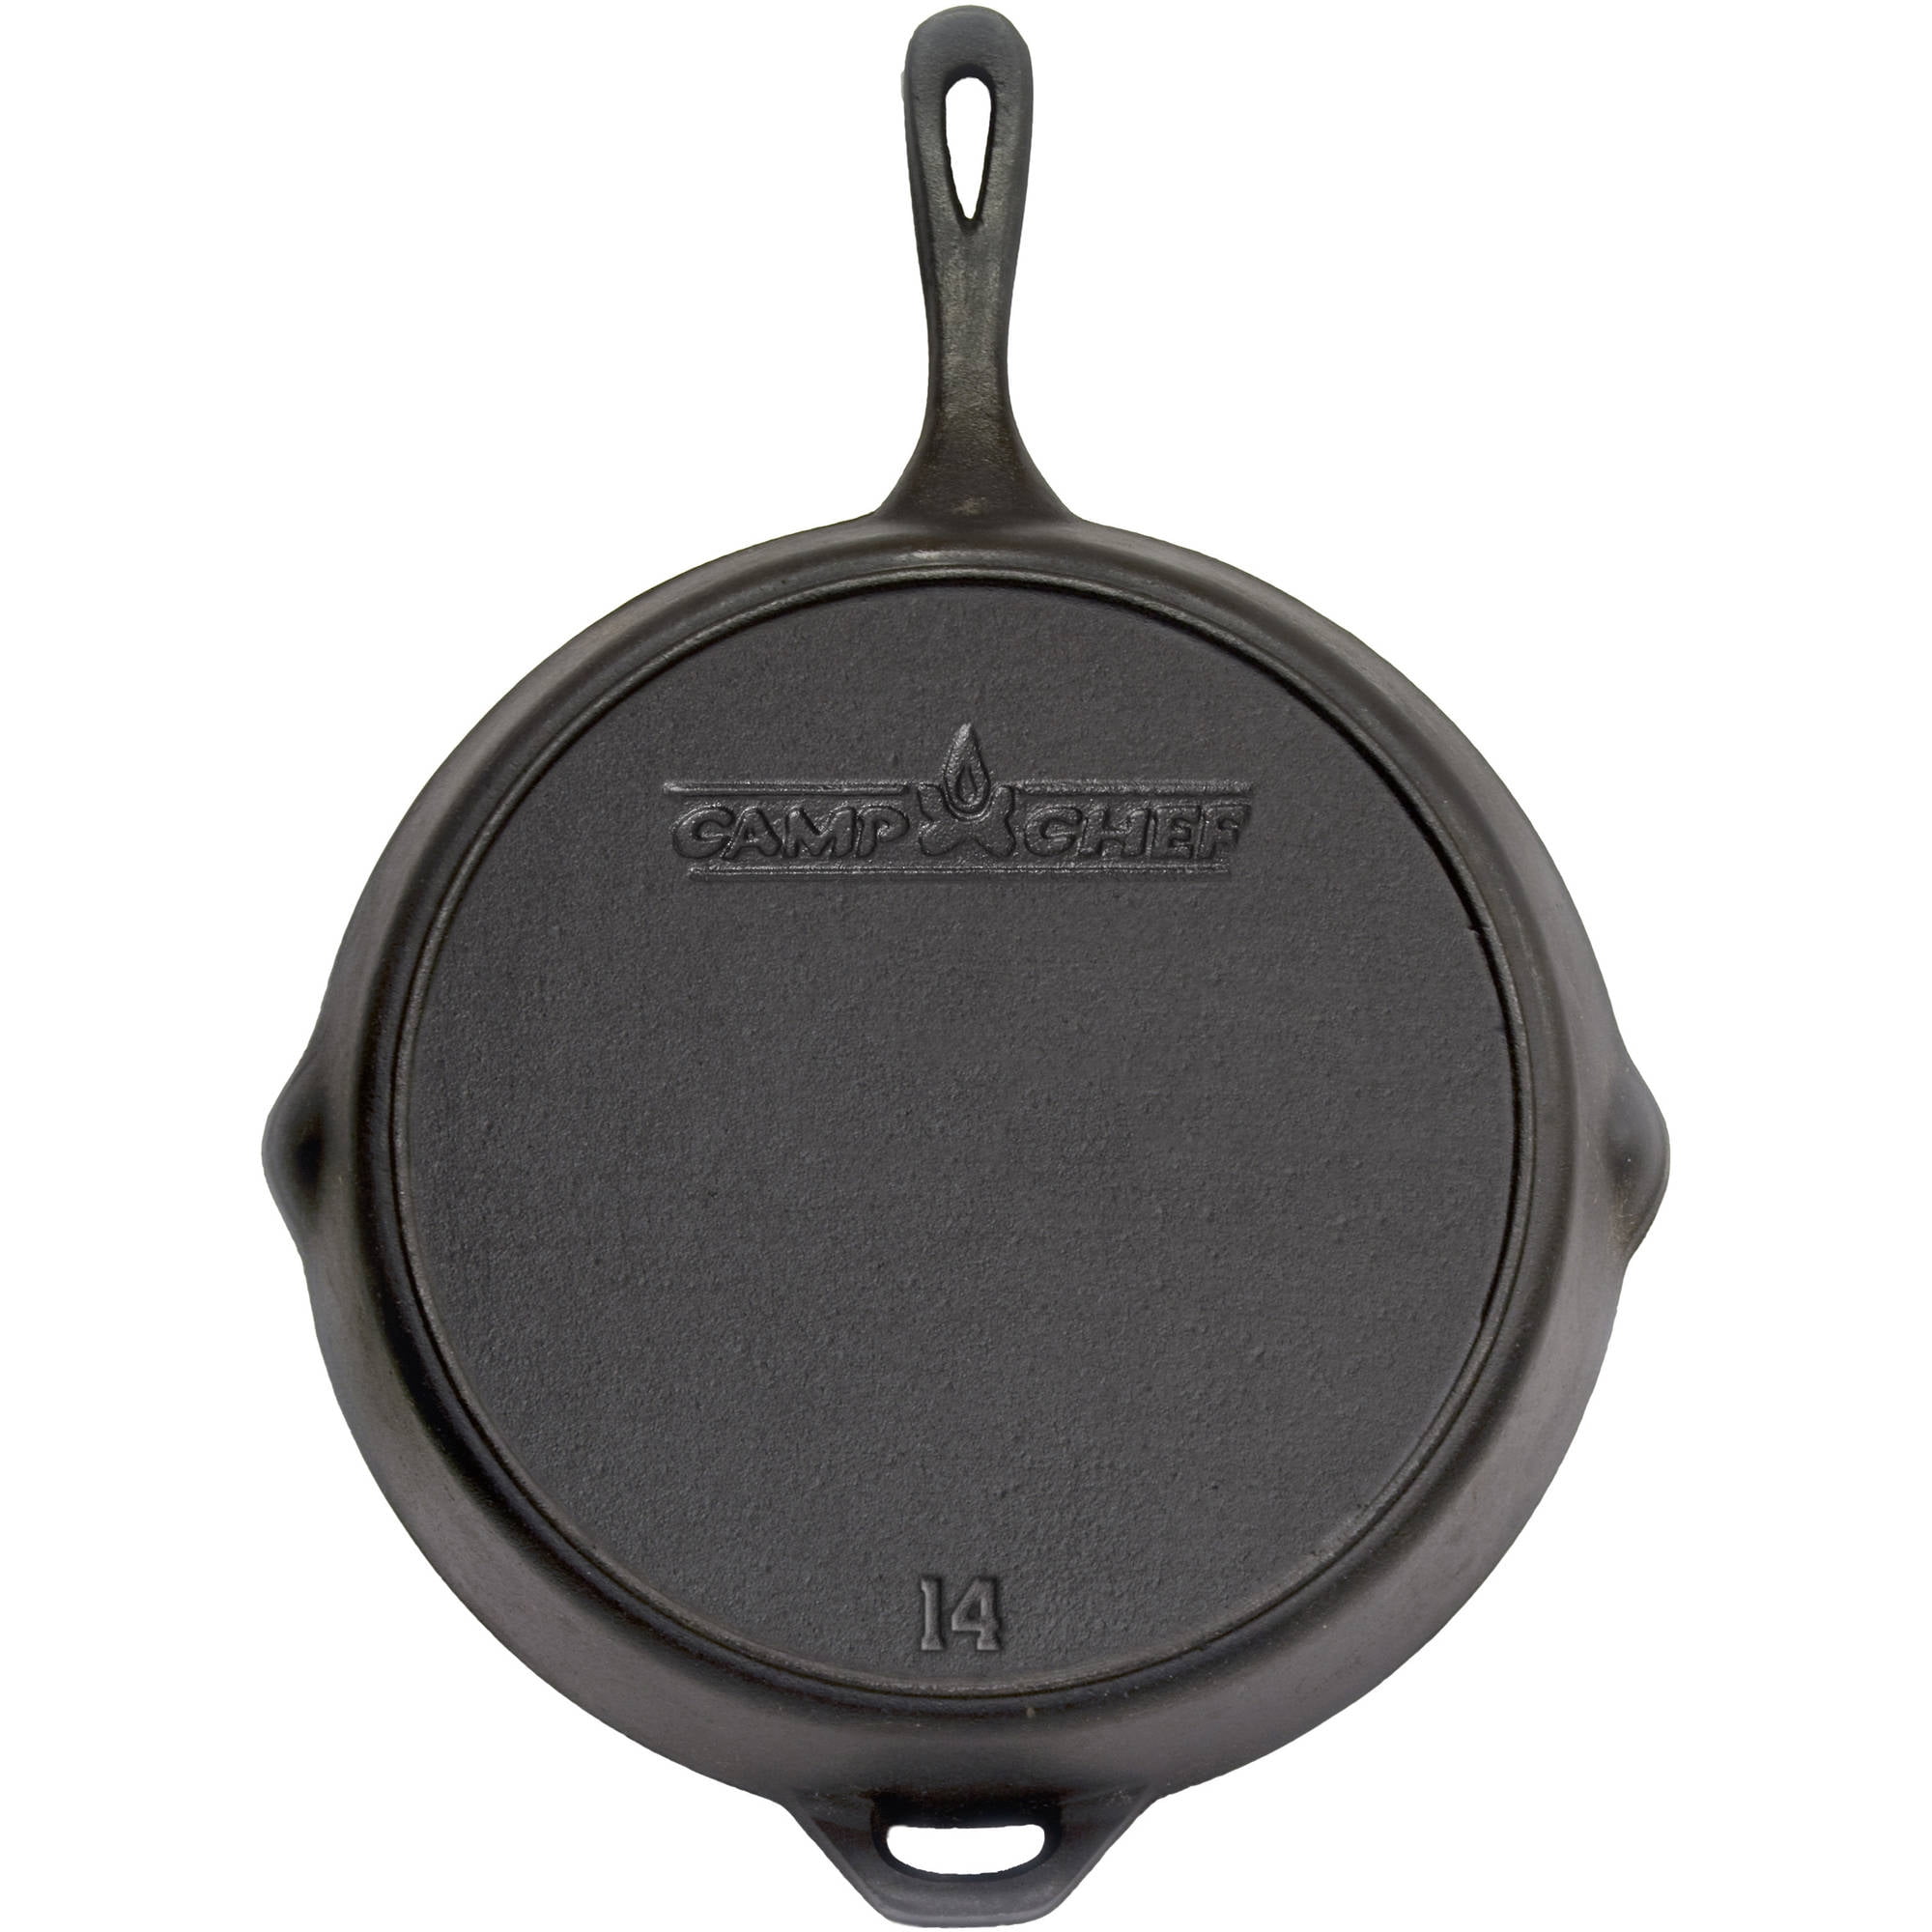 Cast Iron Is What Your Camp Cooking's Been Missing - Men's Journal